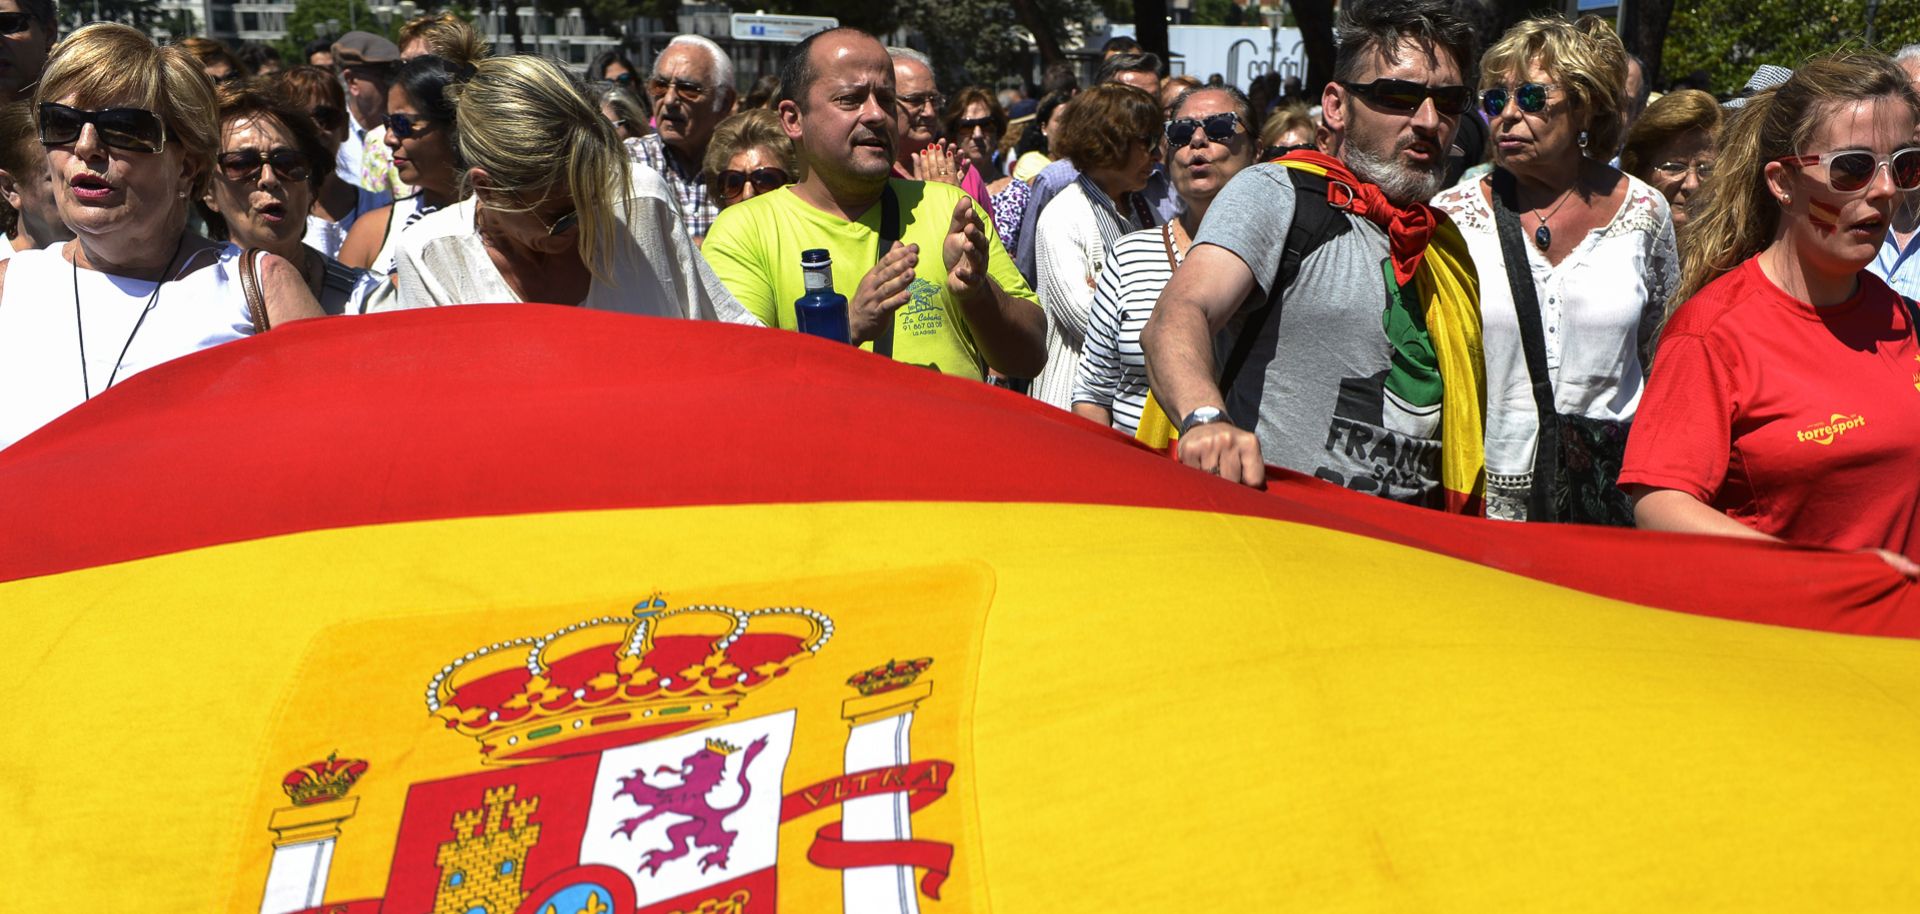 Supporters of Spain's ruling Popular Party march behind a Spanish flag in Madrid on May 30, 2015 during a demonstration following the party’s loss of votes in the recent regional and municipal elections.